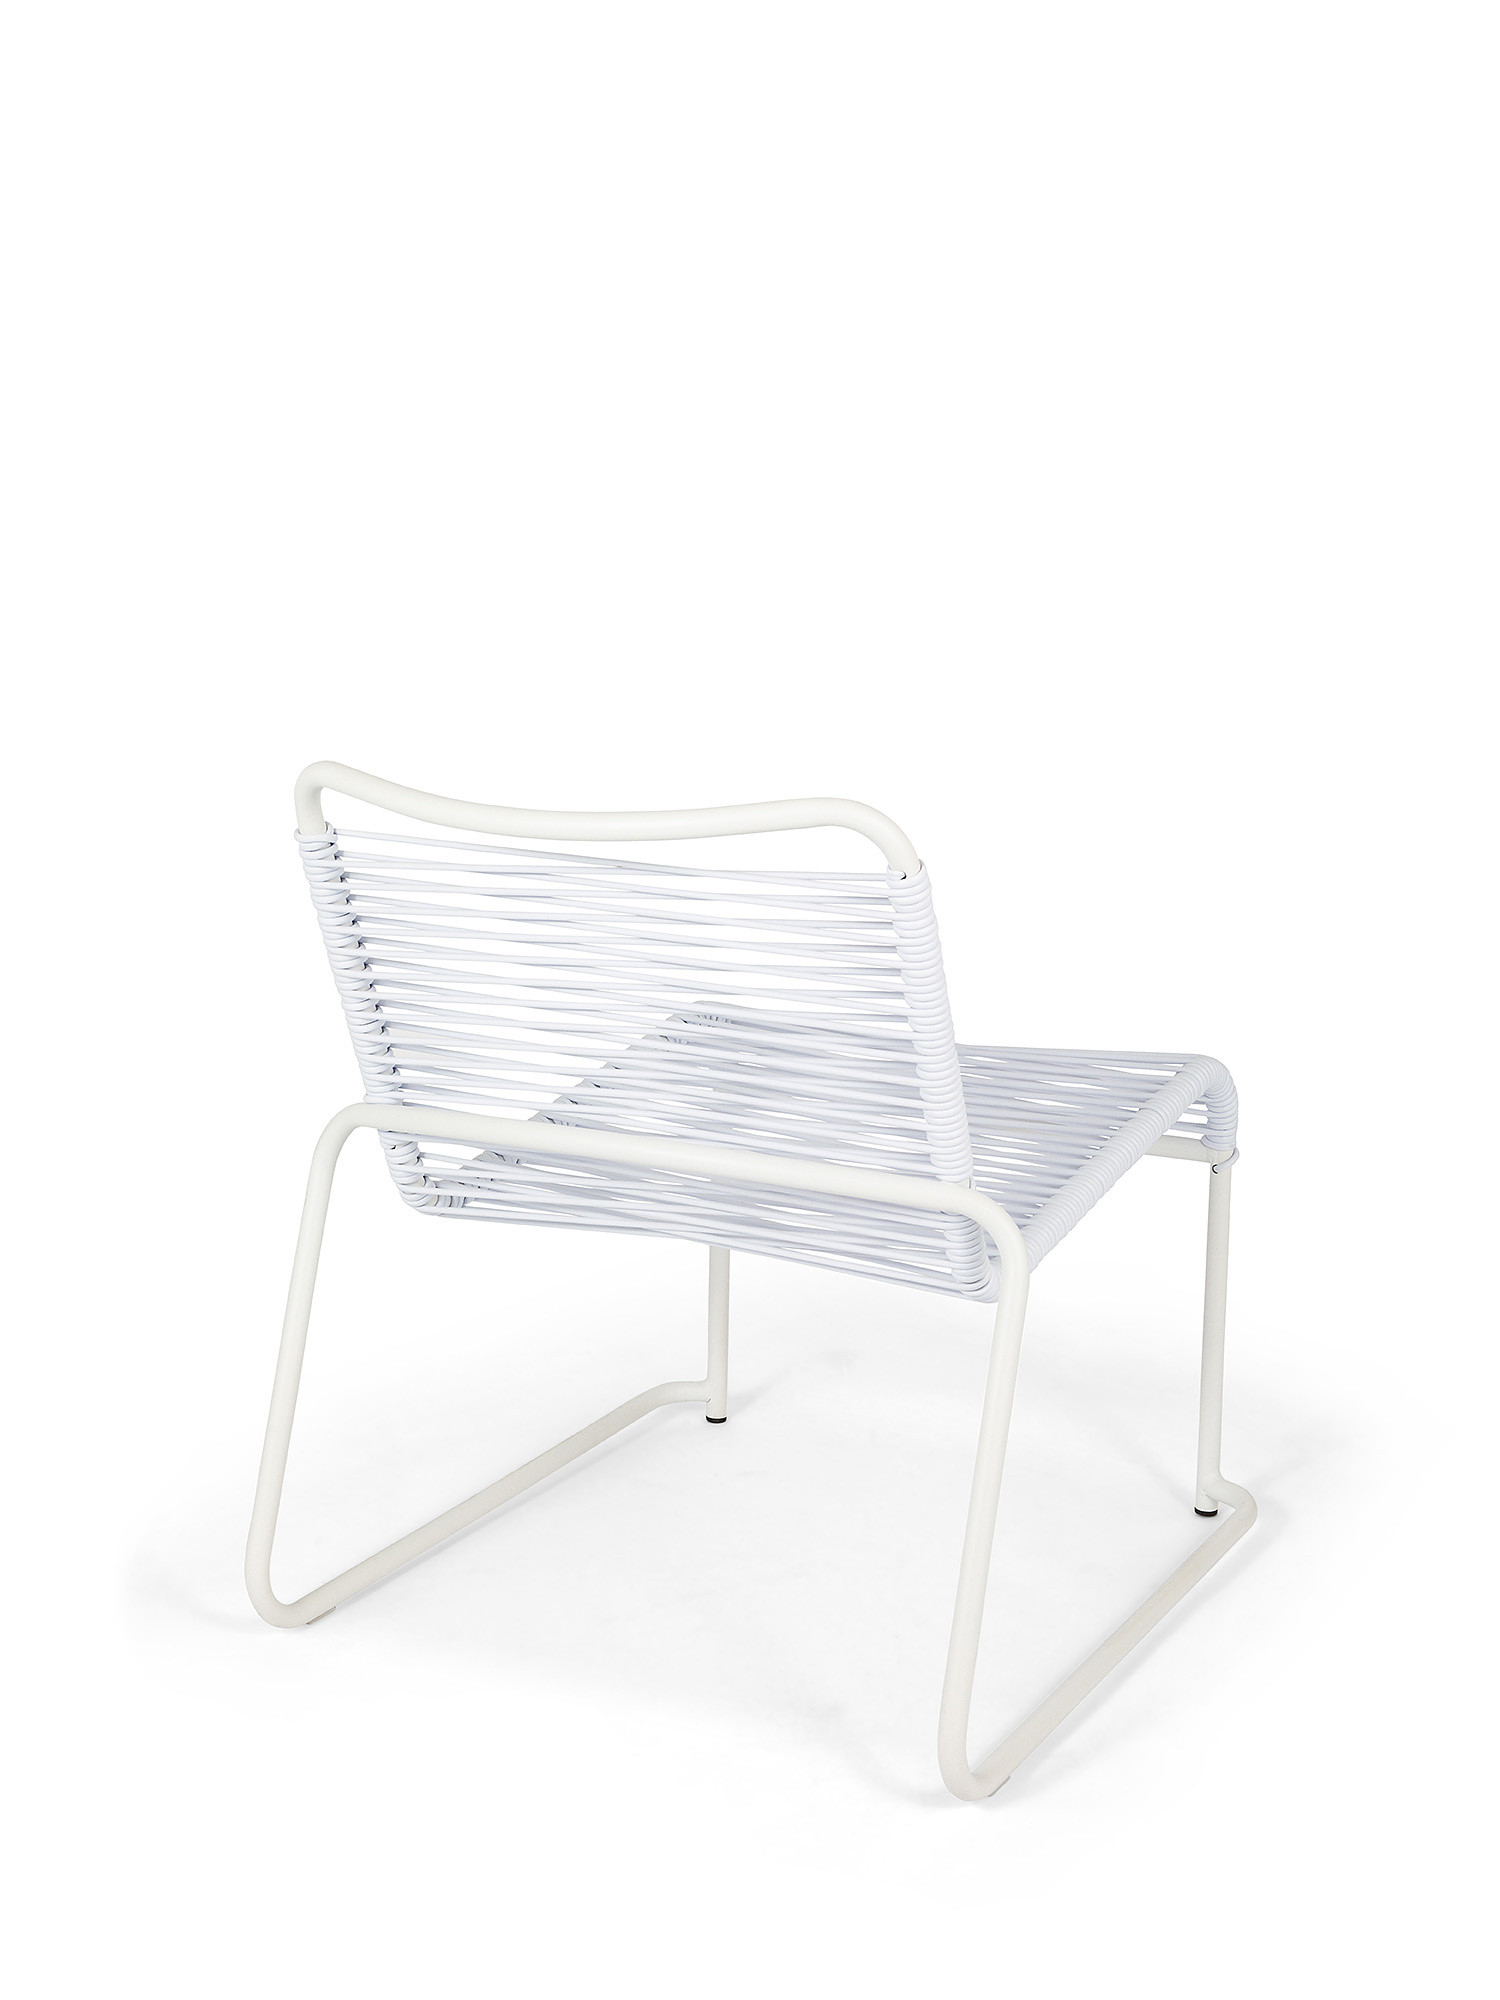 Fiam - Outdoor armchair in aluminum and PVC Lido, Grey, large image number 1